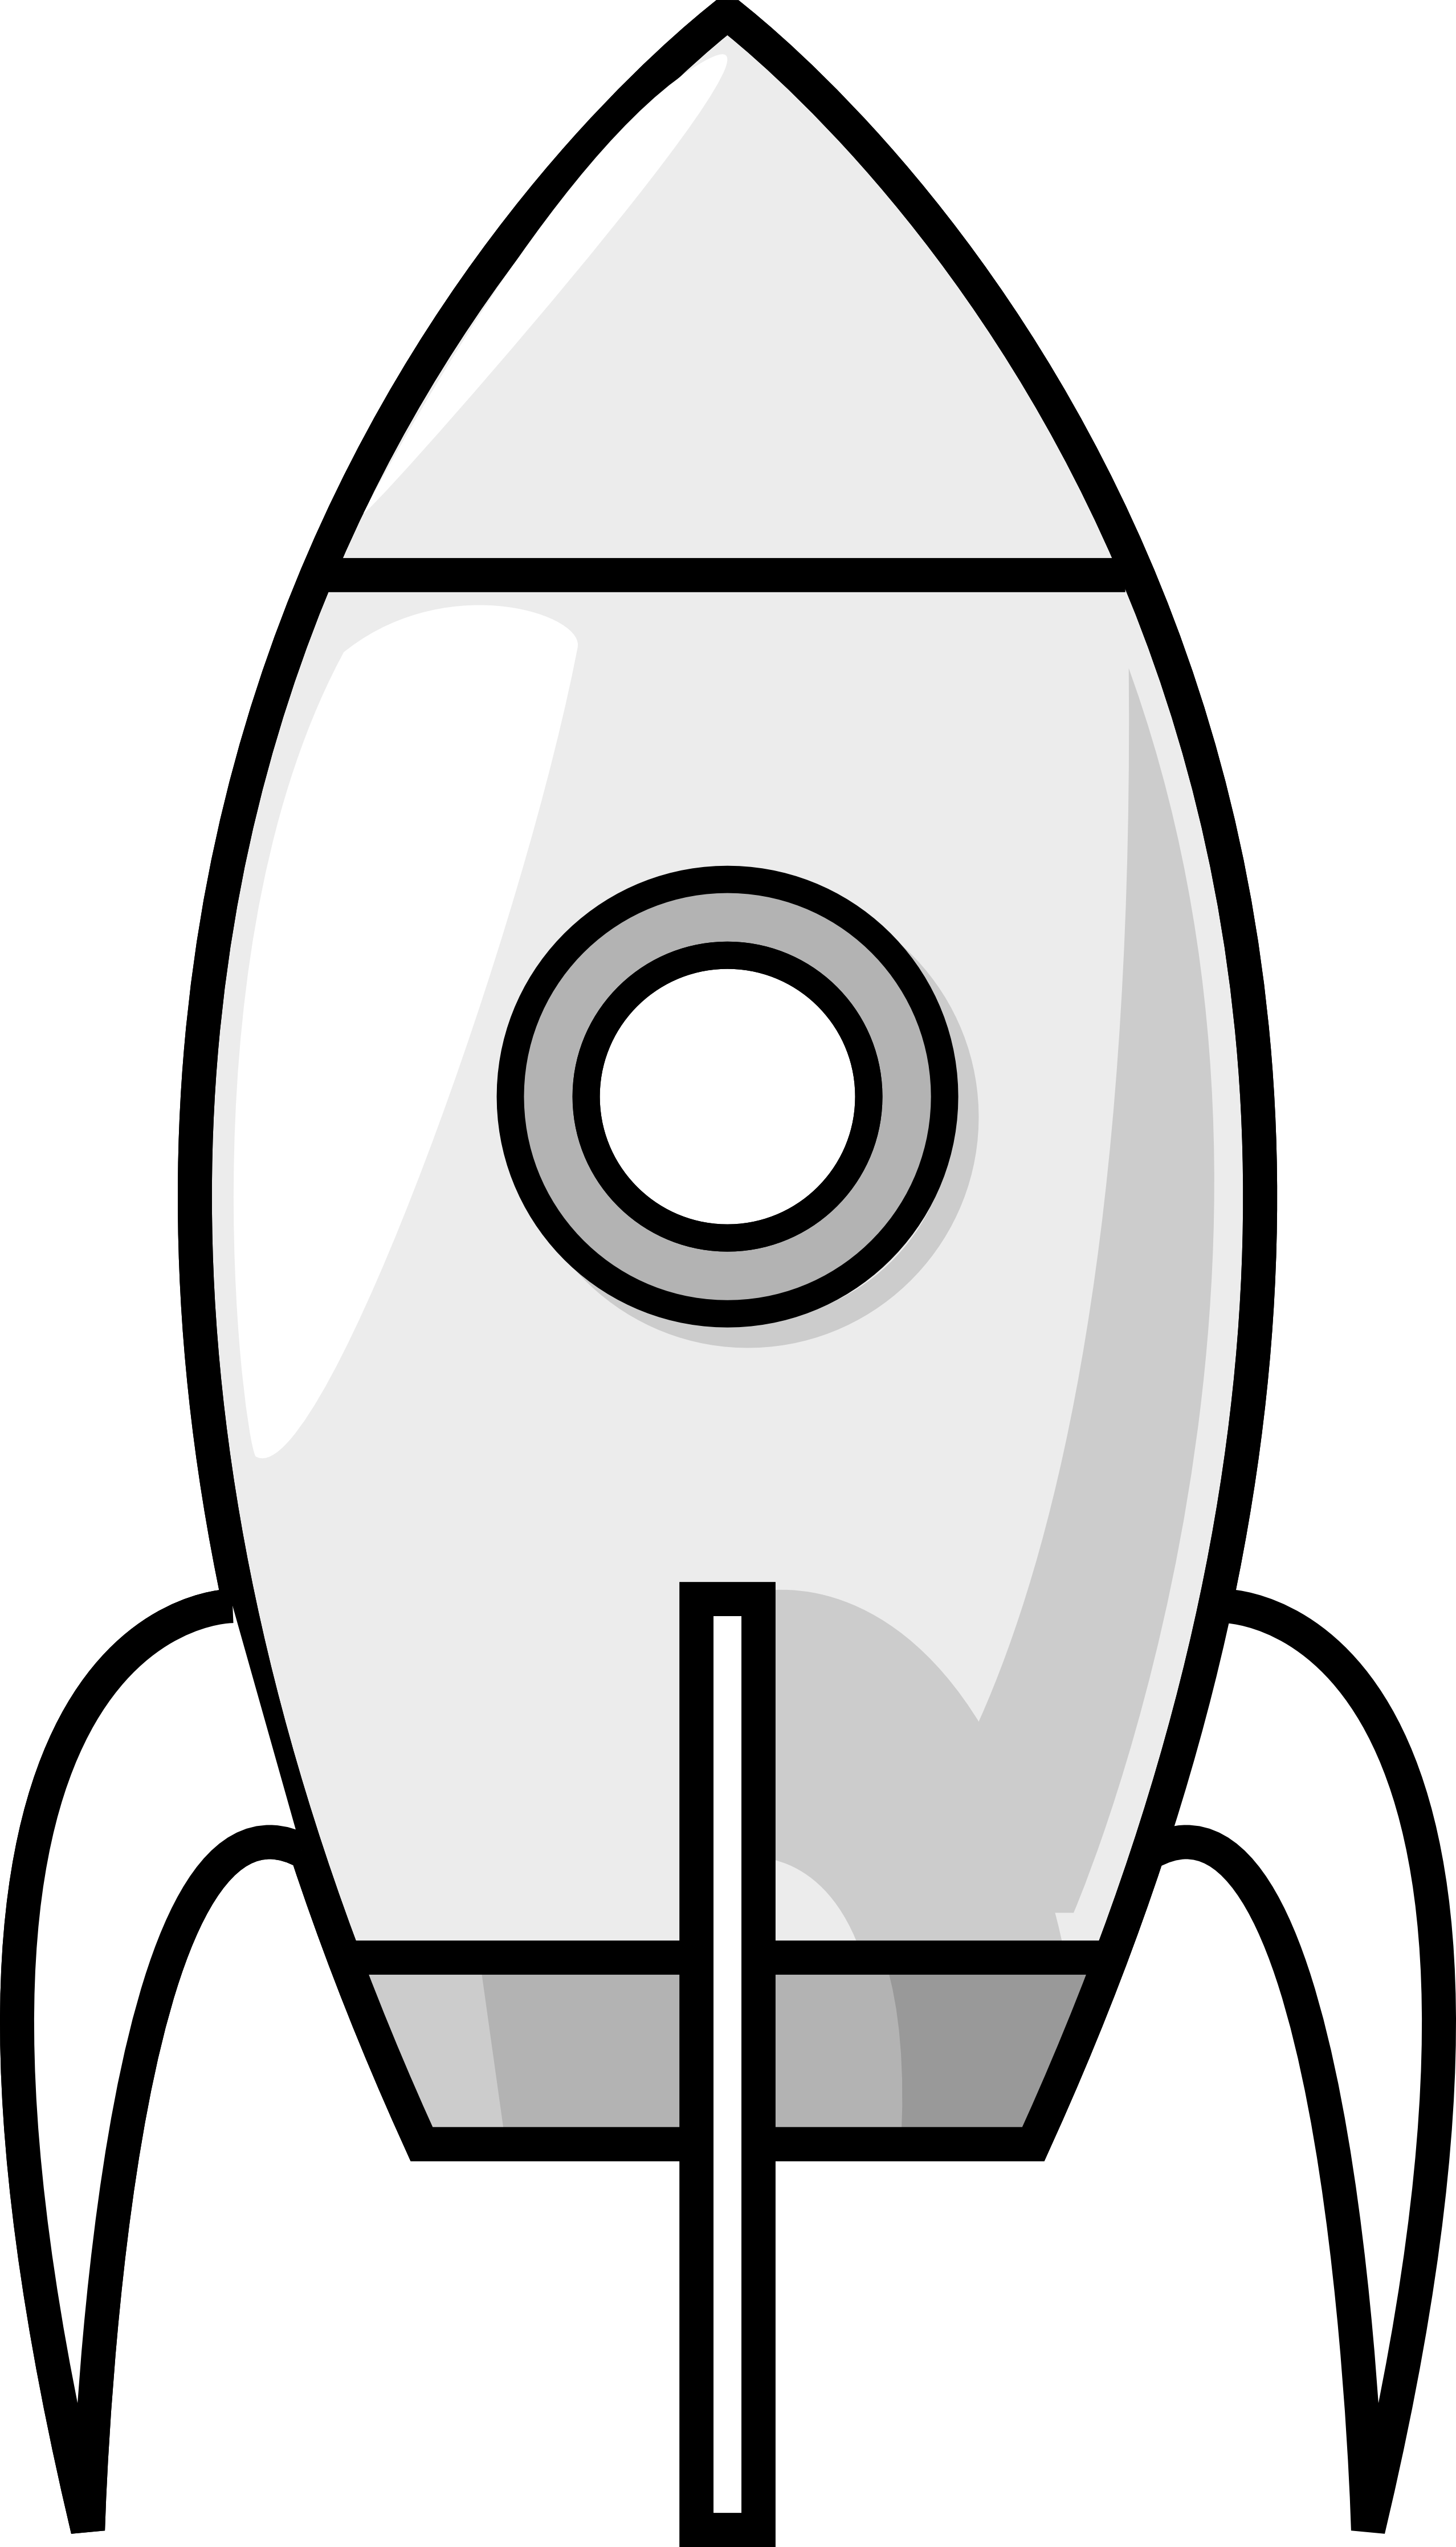 Rocket Clipart Black And White Clipart Panda Free Clipart